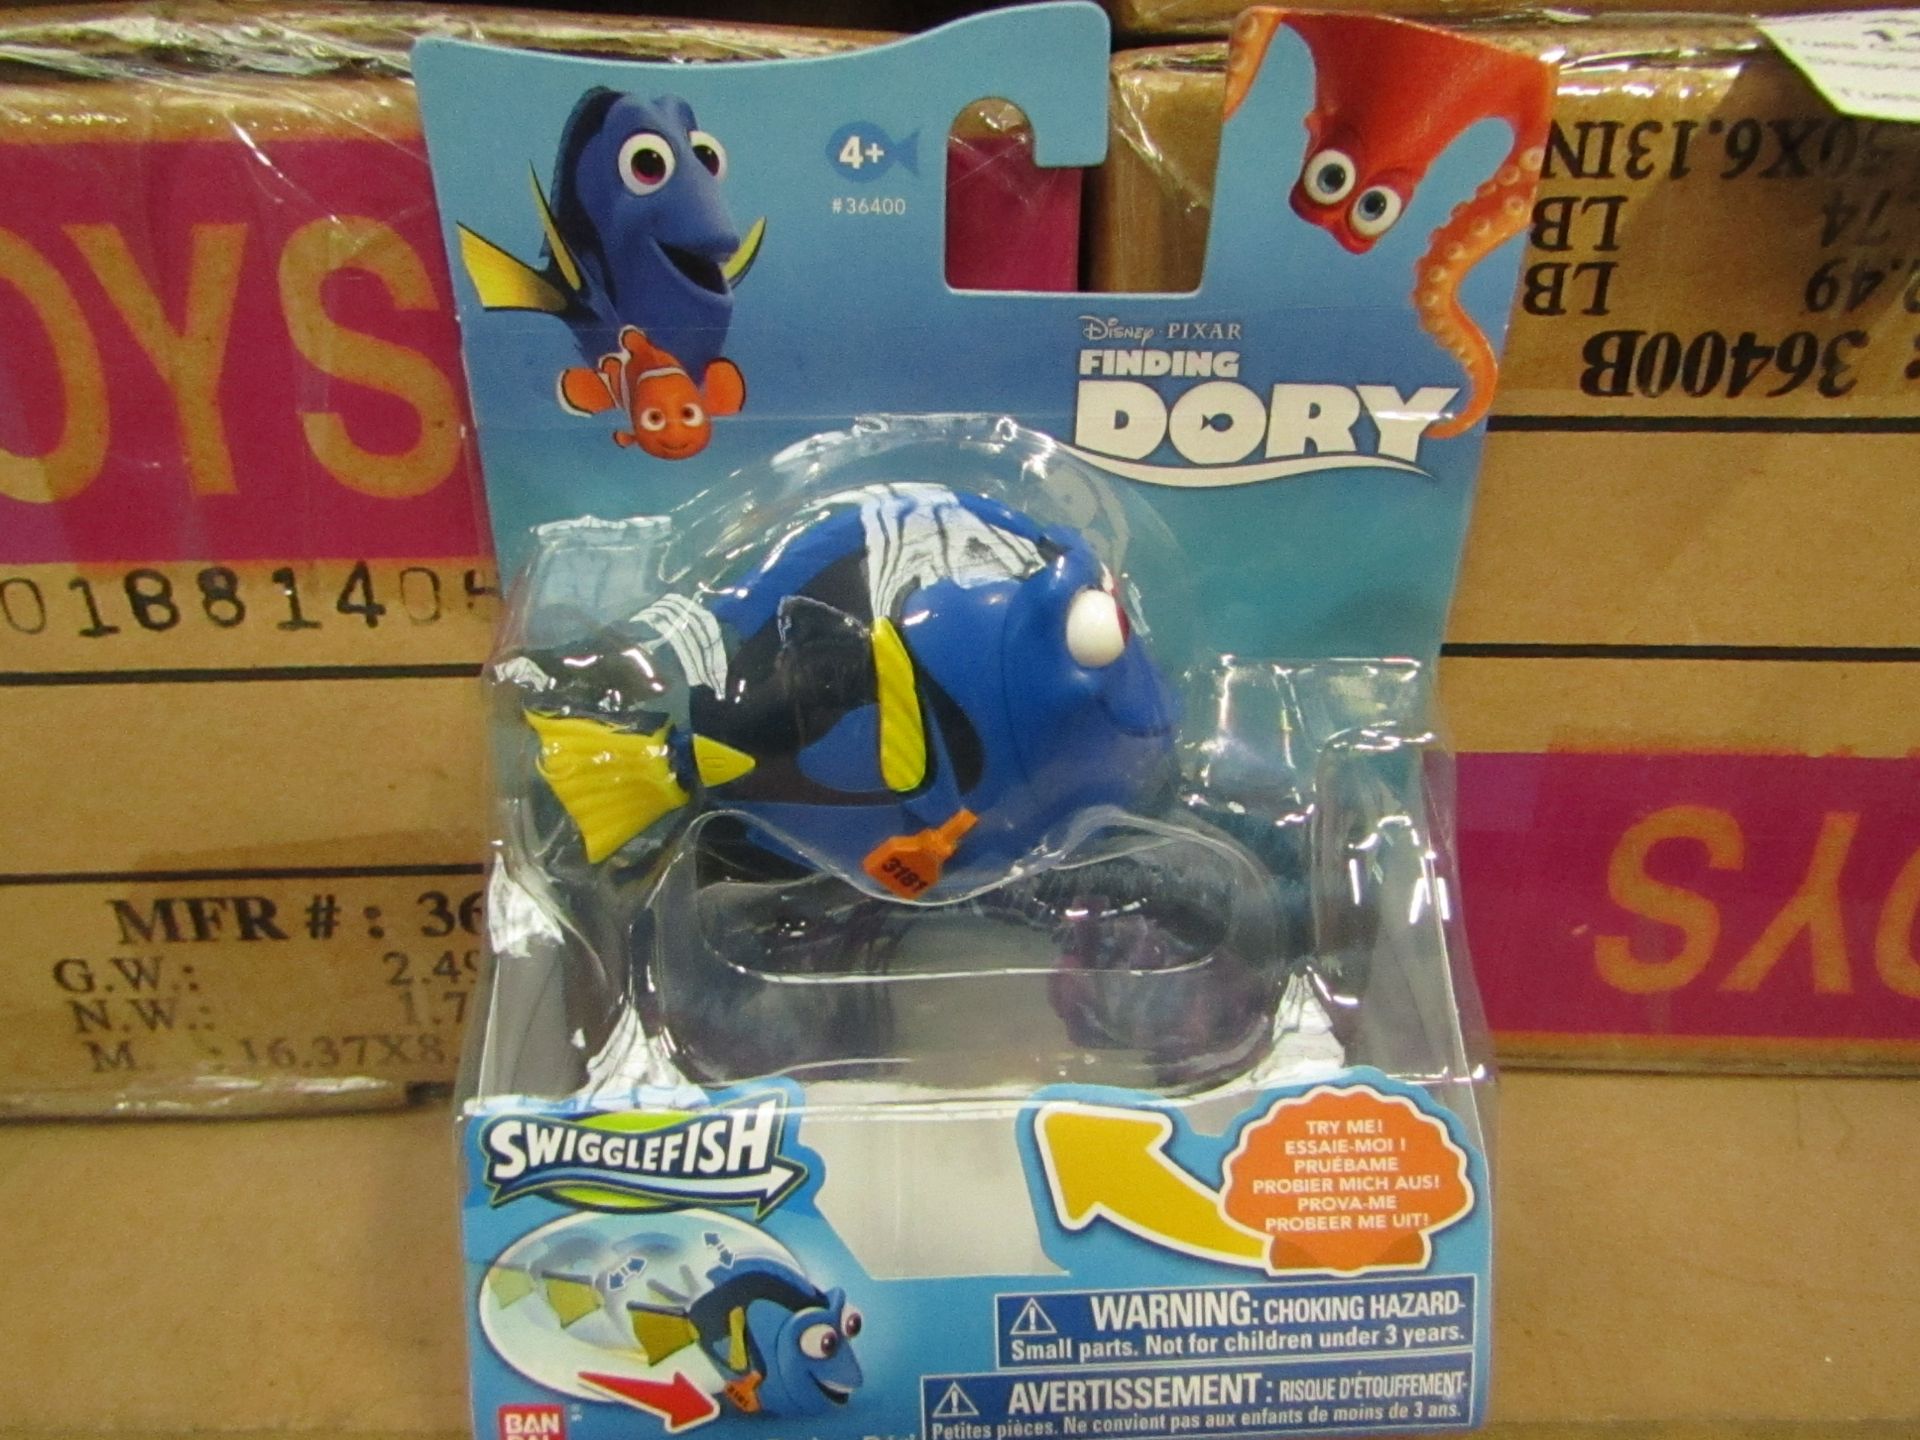 12x Finding Dory swiggle fish, new and boxed.